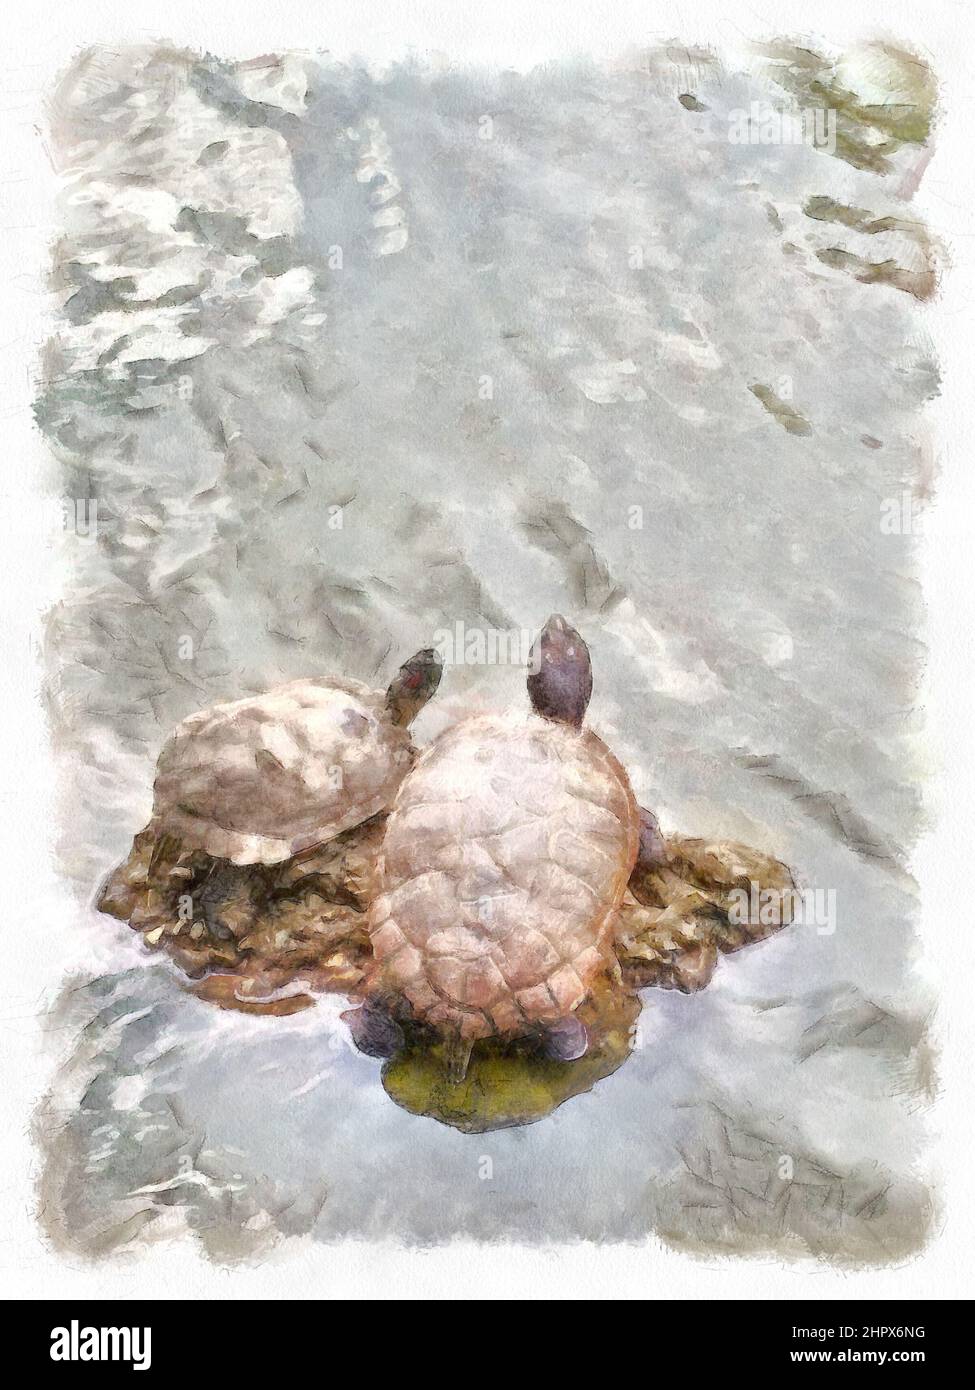 Digital brushwork of two turtles relax on a rock surrounded with ripple water in a pond. Stock Photo